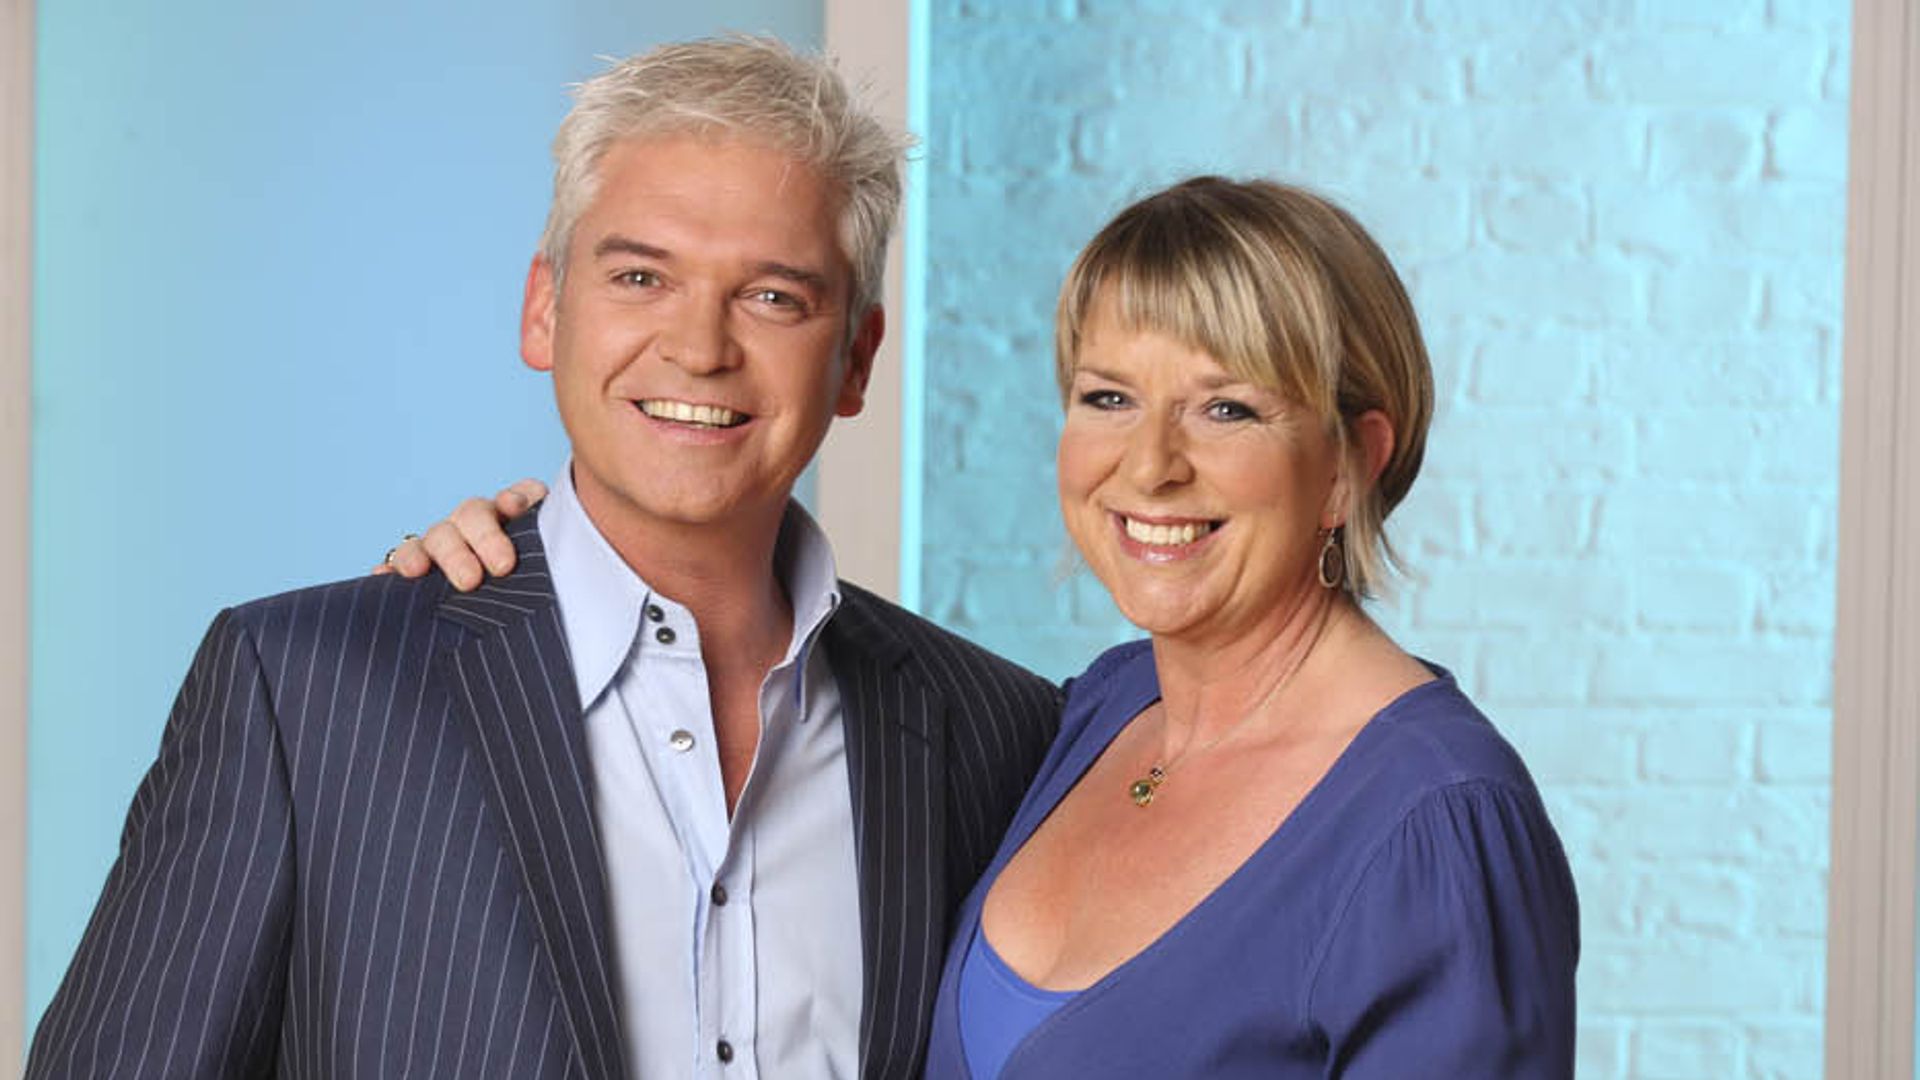 Fern Britton makes surprising admission about her time on This Morning with Philip Schofield